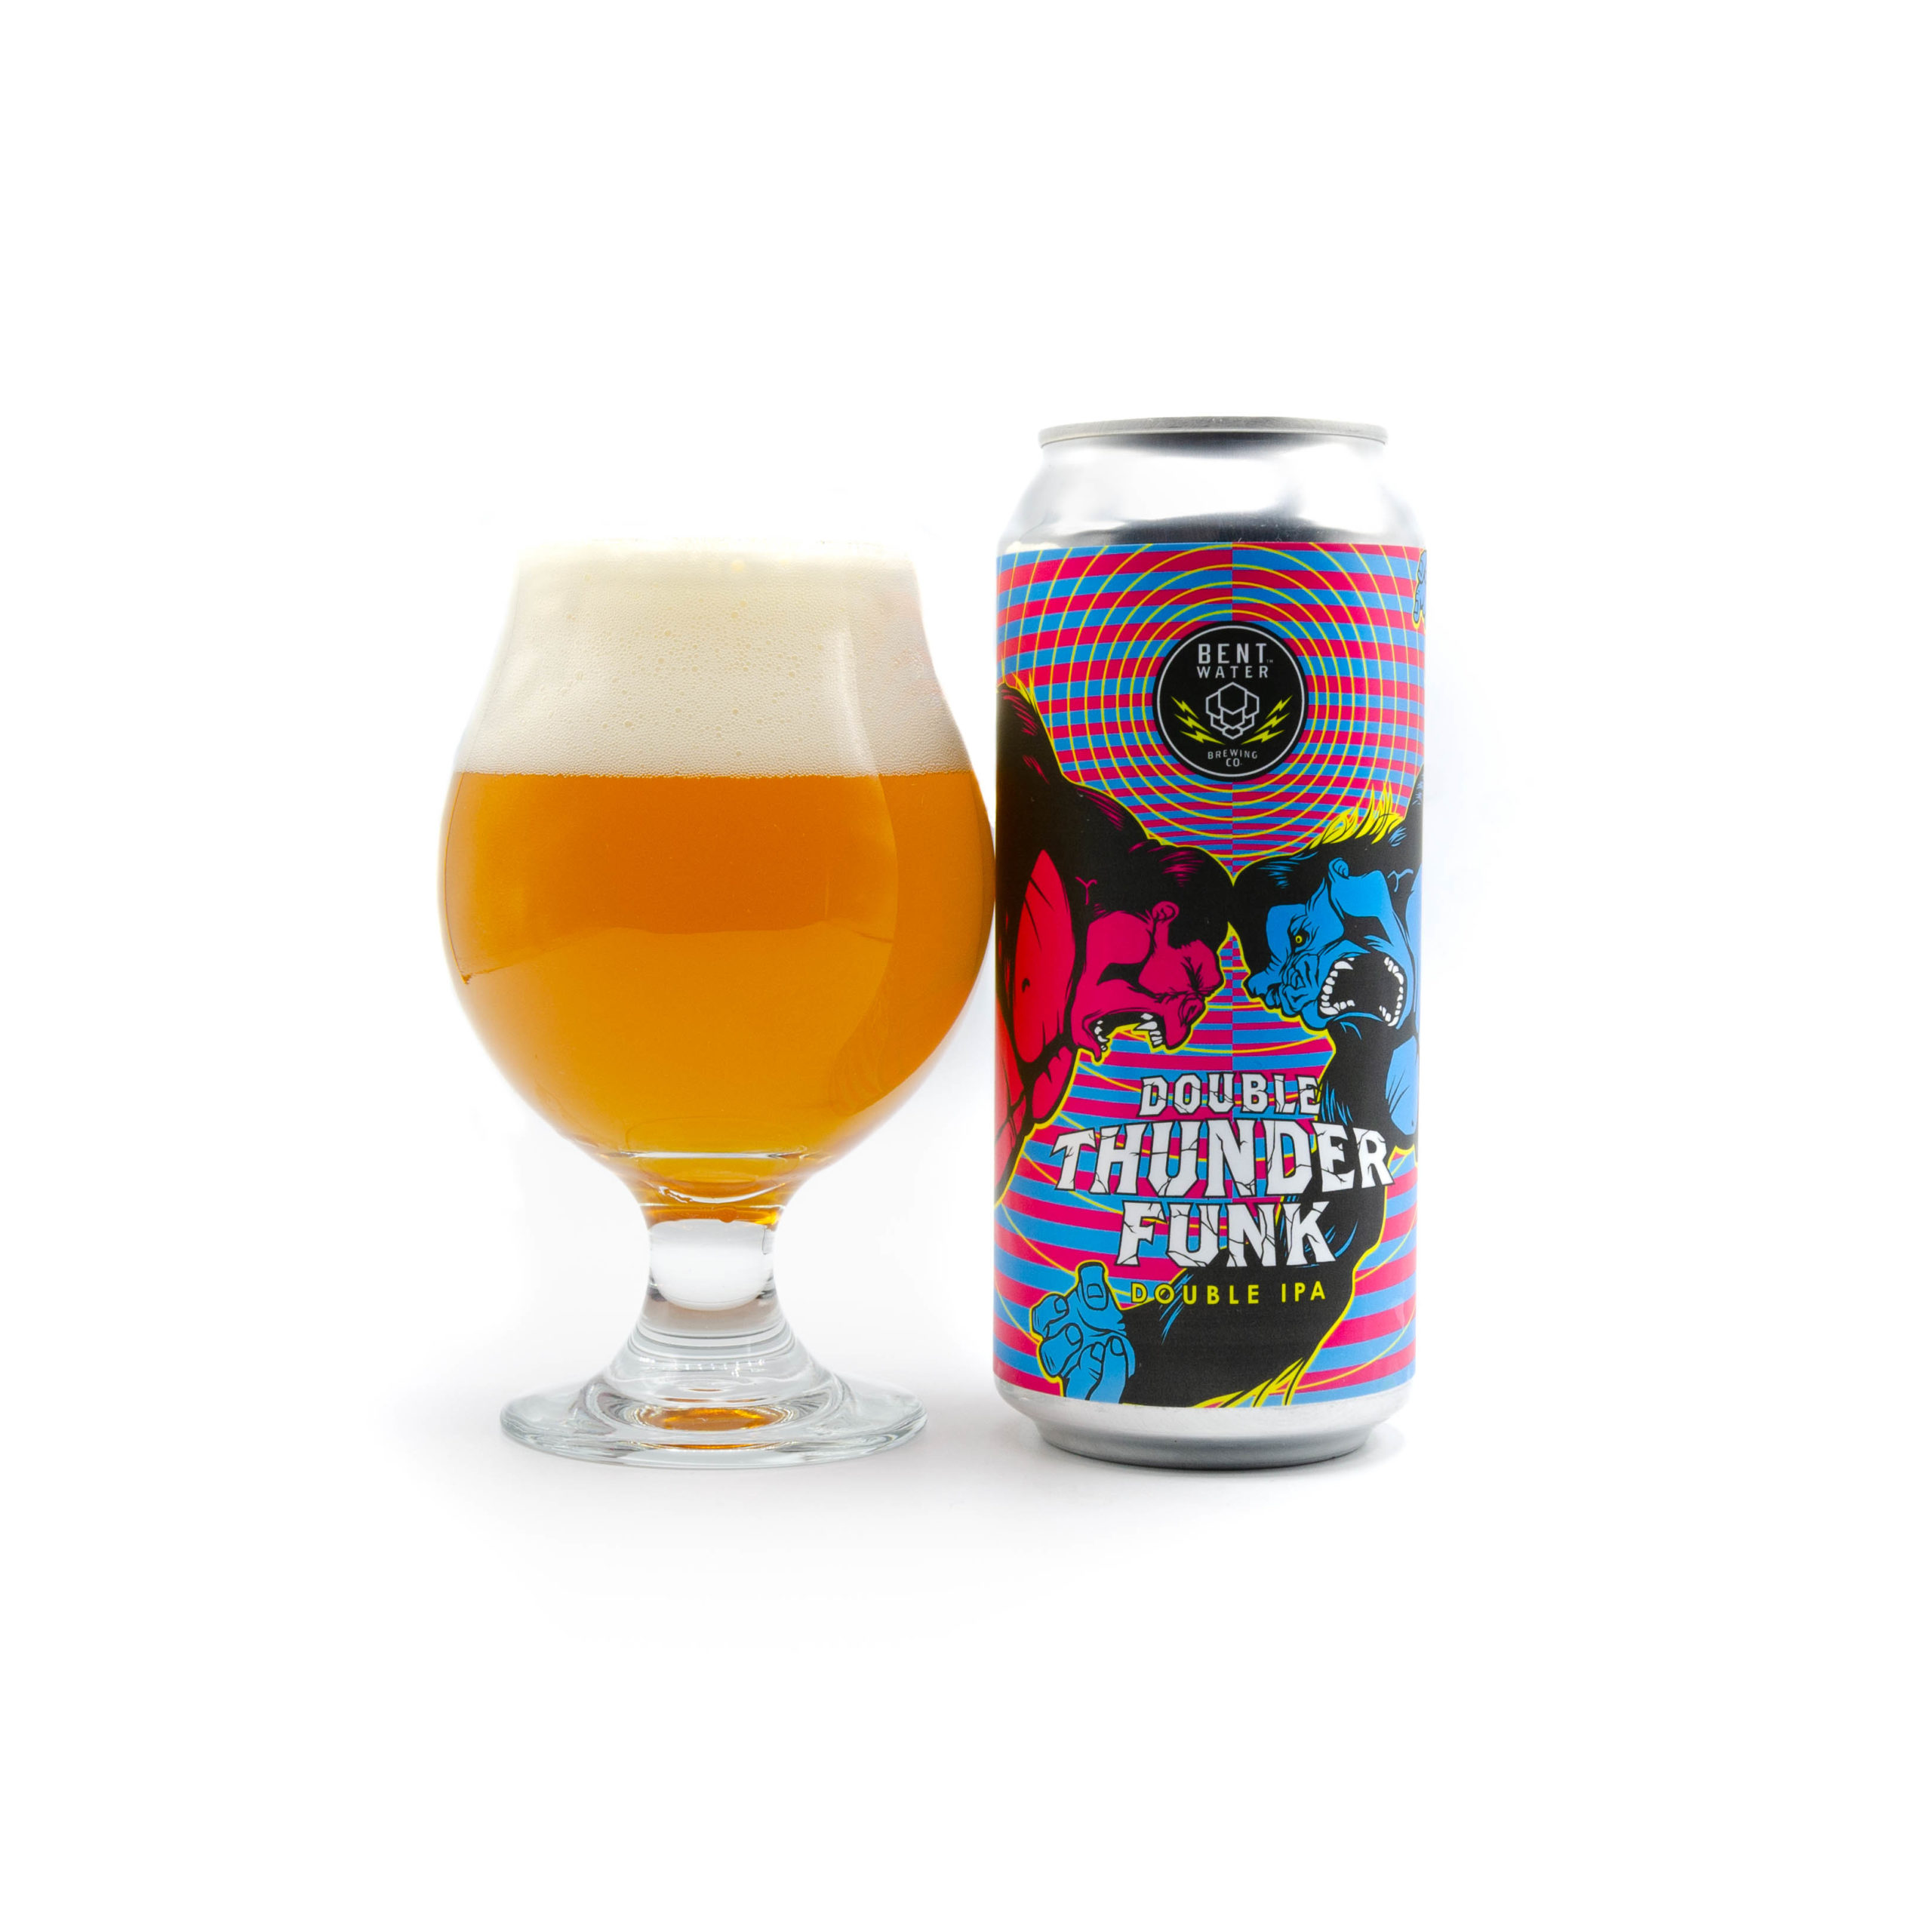 DOUBLE THUNDER FUNK beer image 1